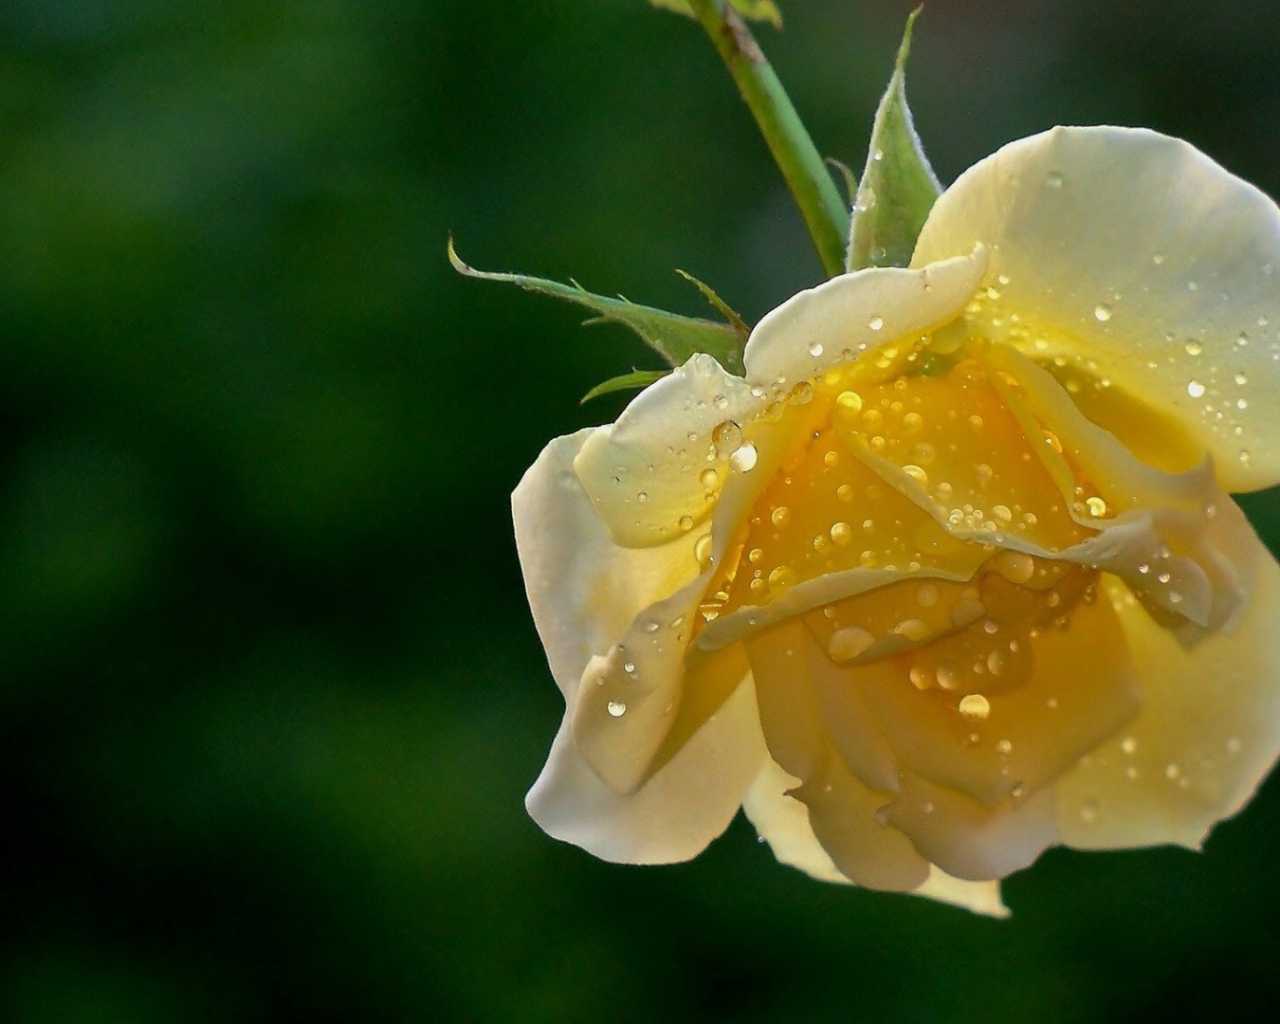 Wet yellow rose on a green background